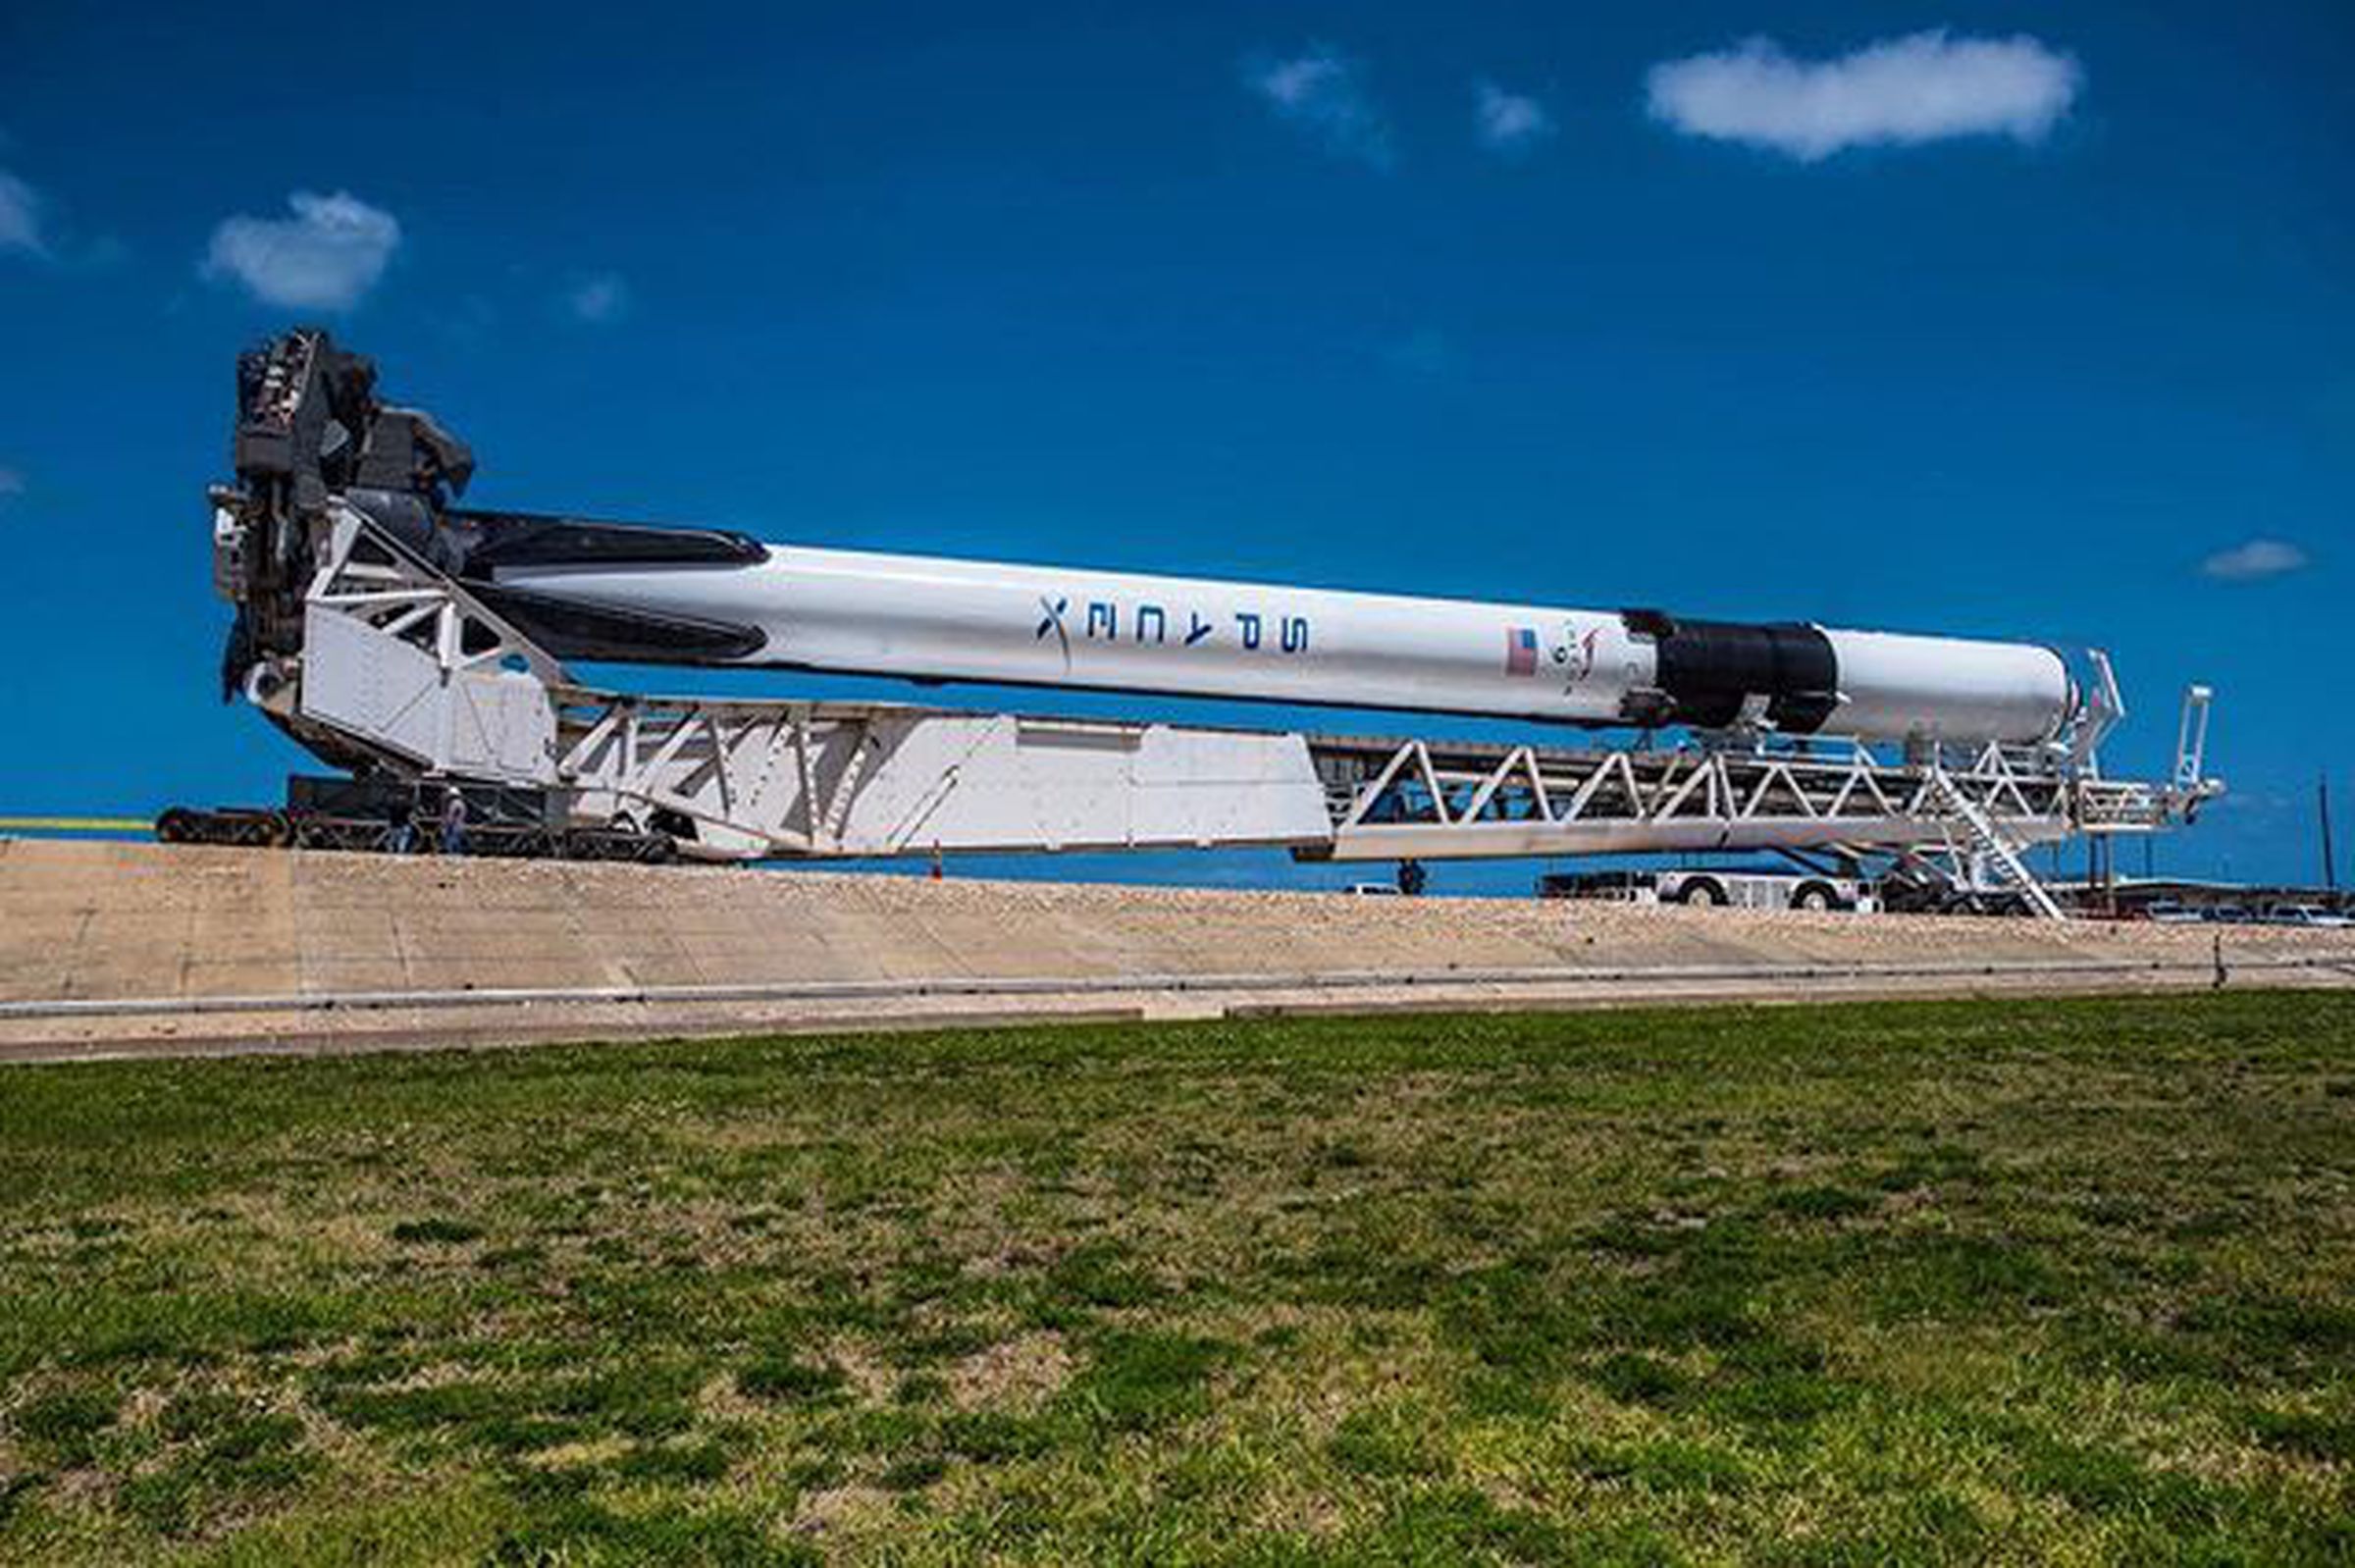 SpaceX’s Falcon 9 Block 5 rocket rolling out to its launchpad